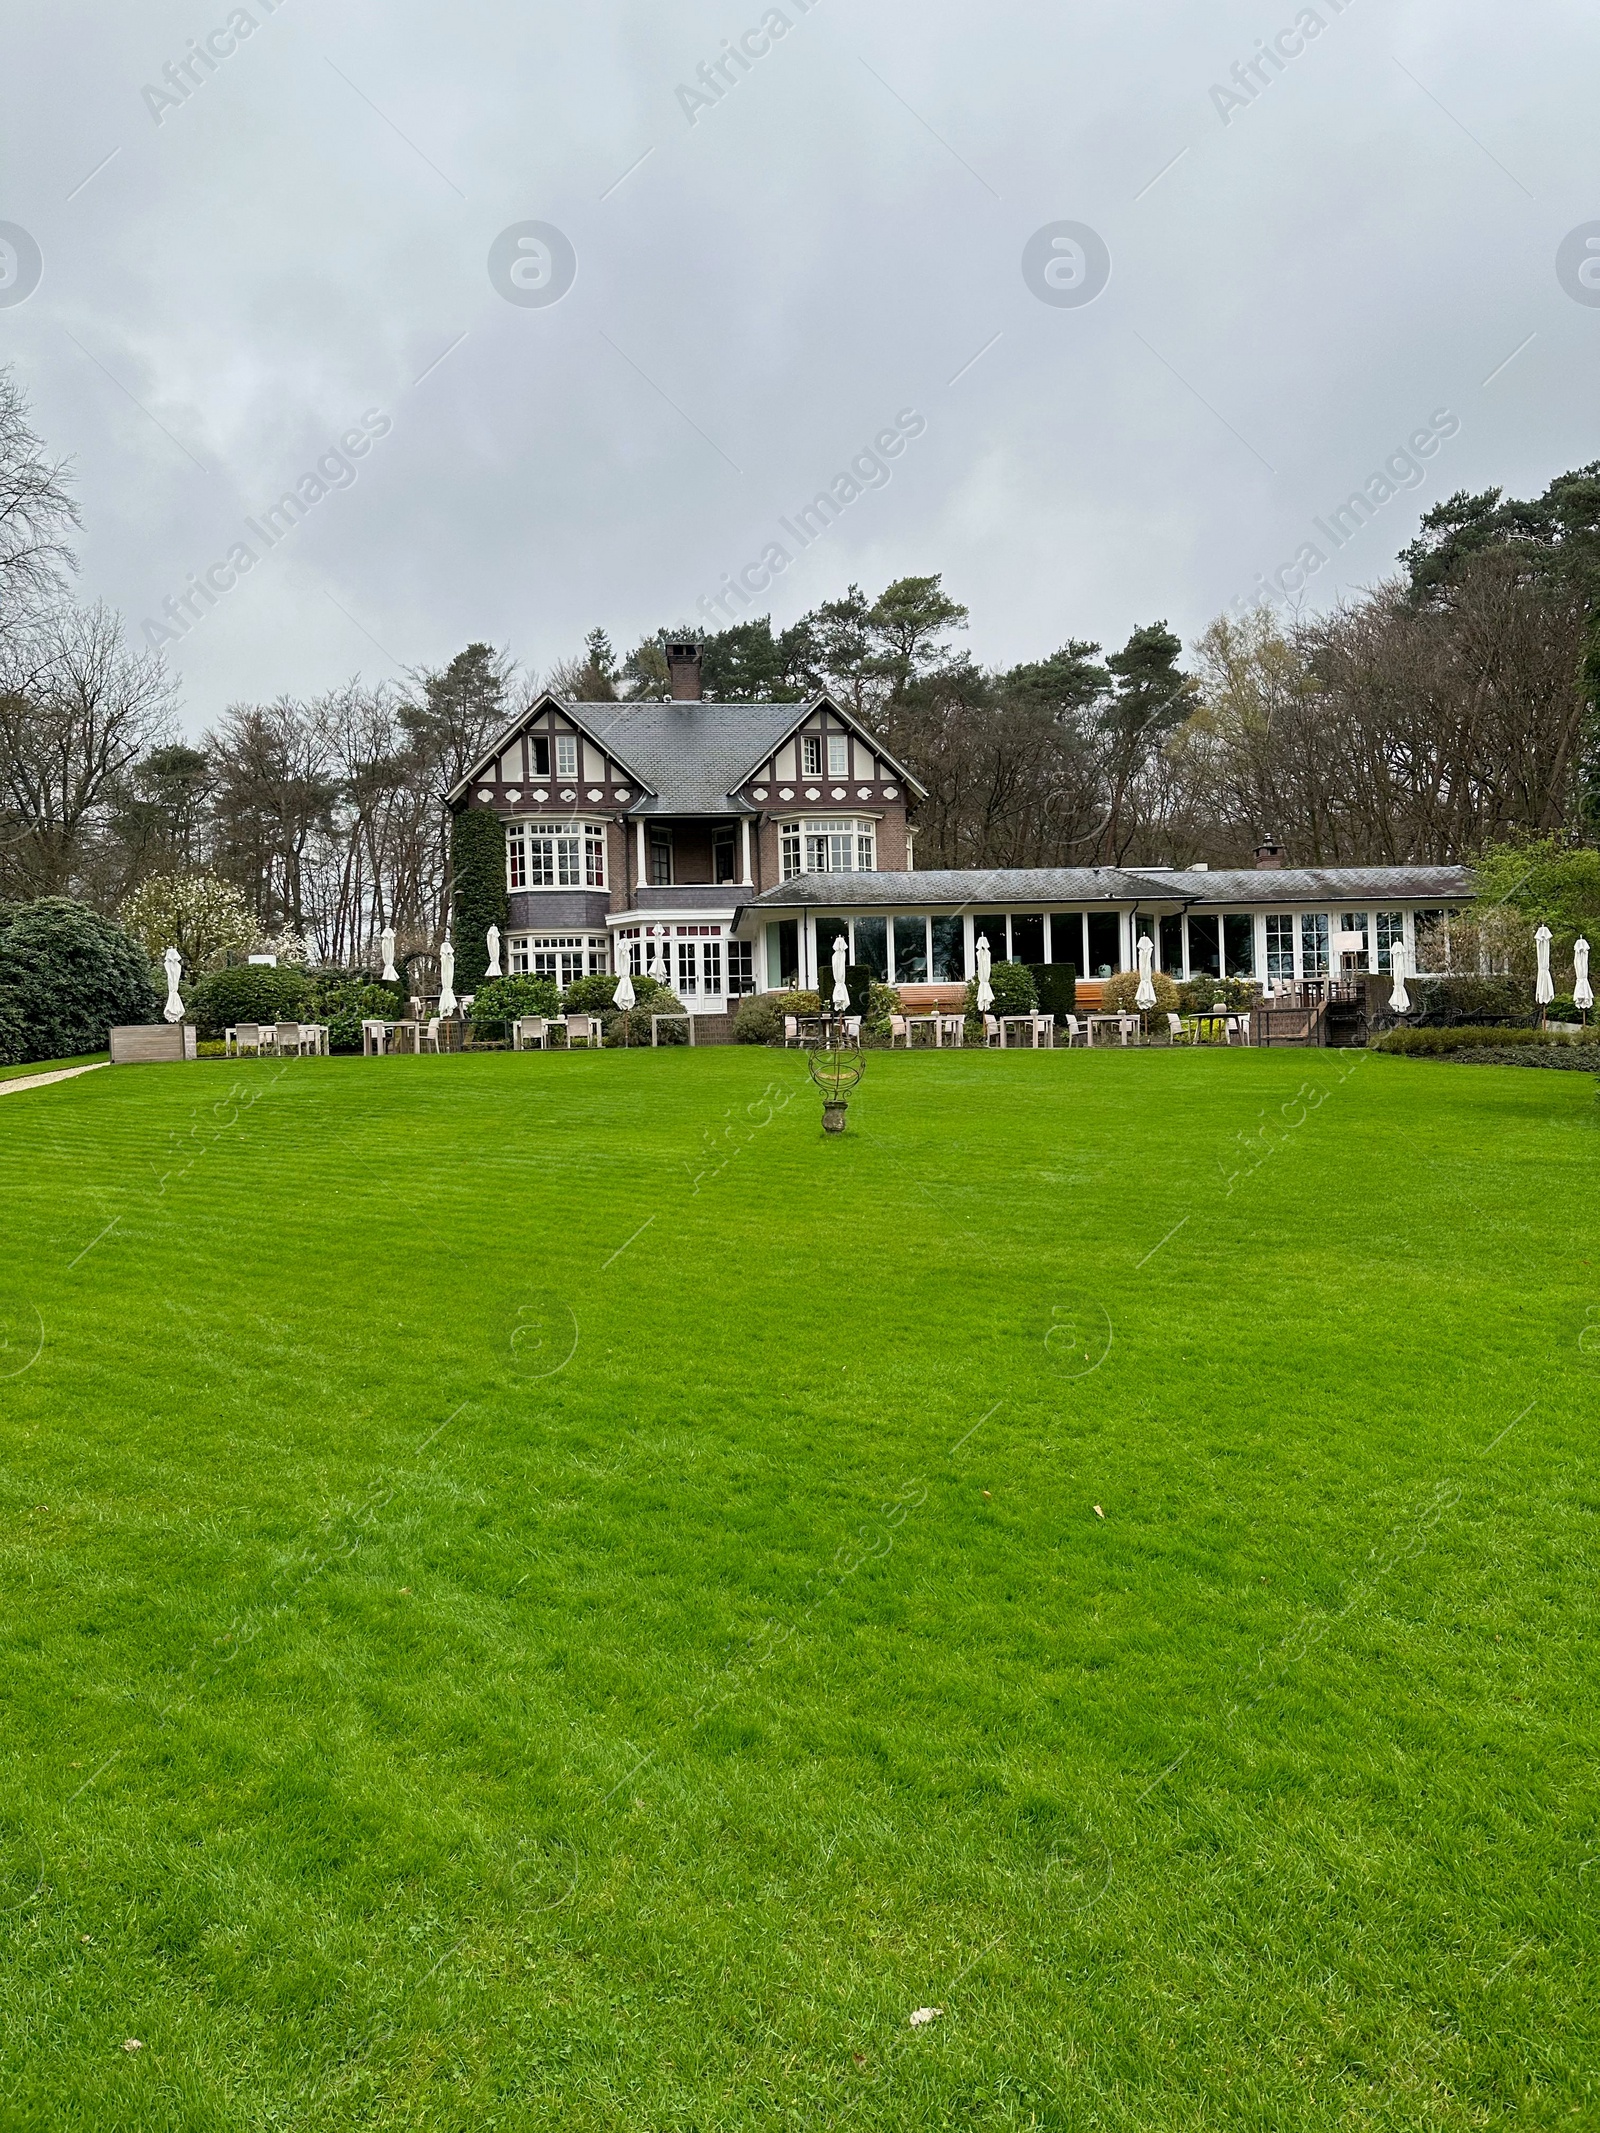 Photo of Luxury hotel, garden and green trees outdoors